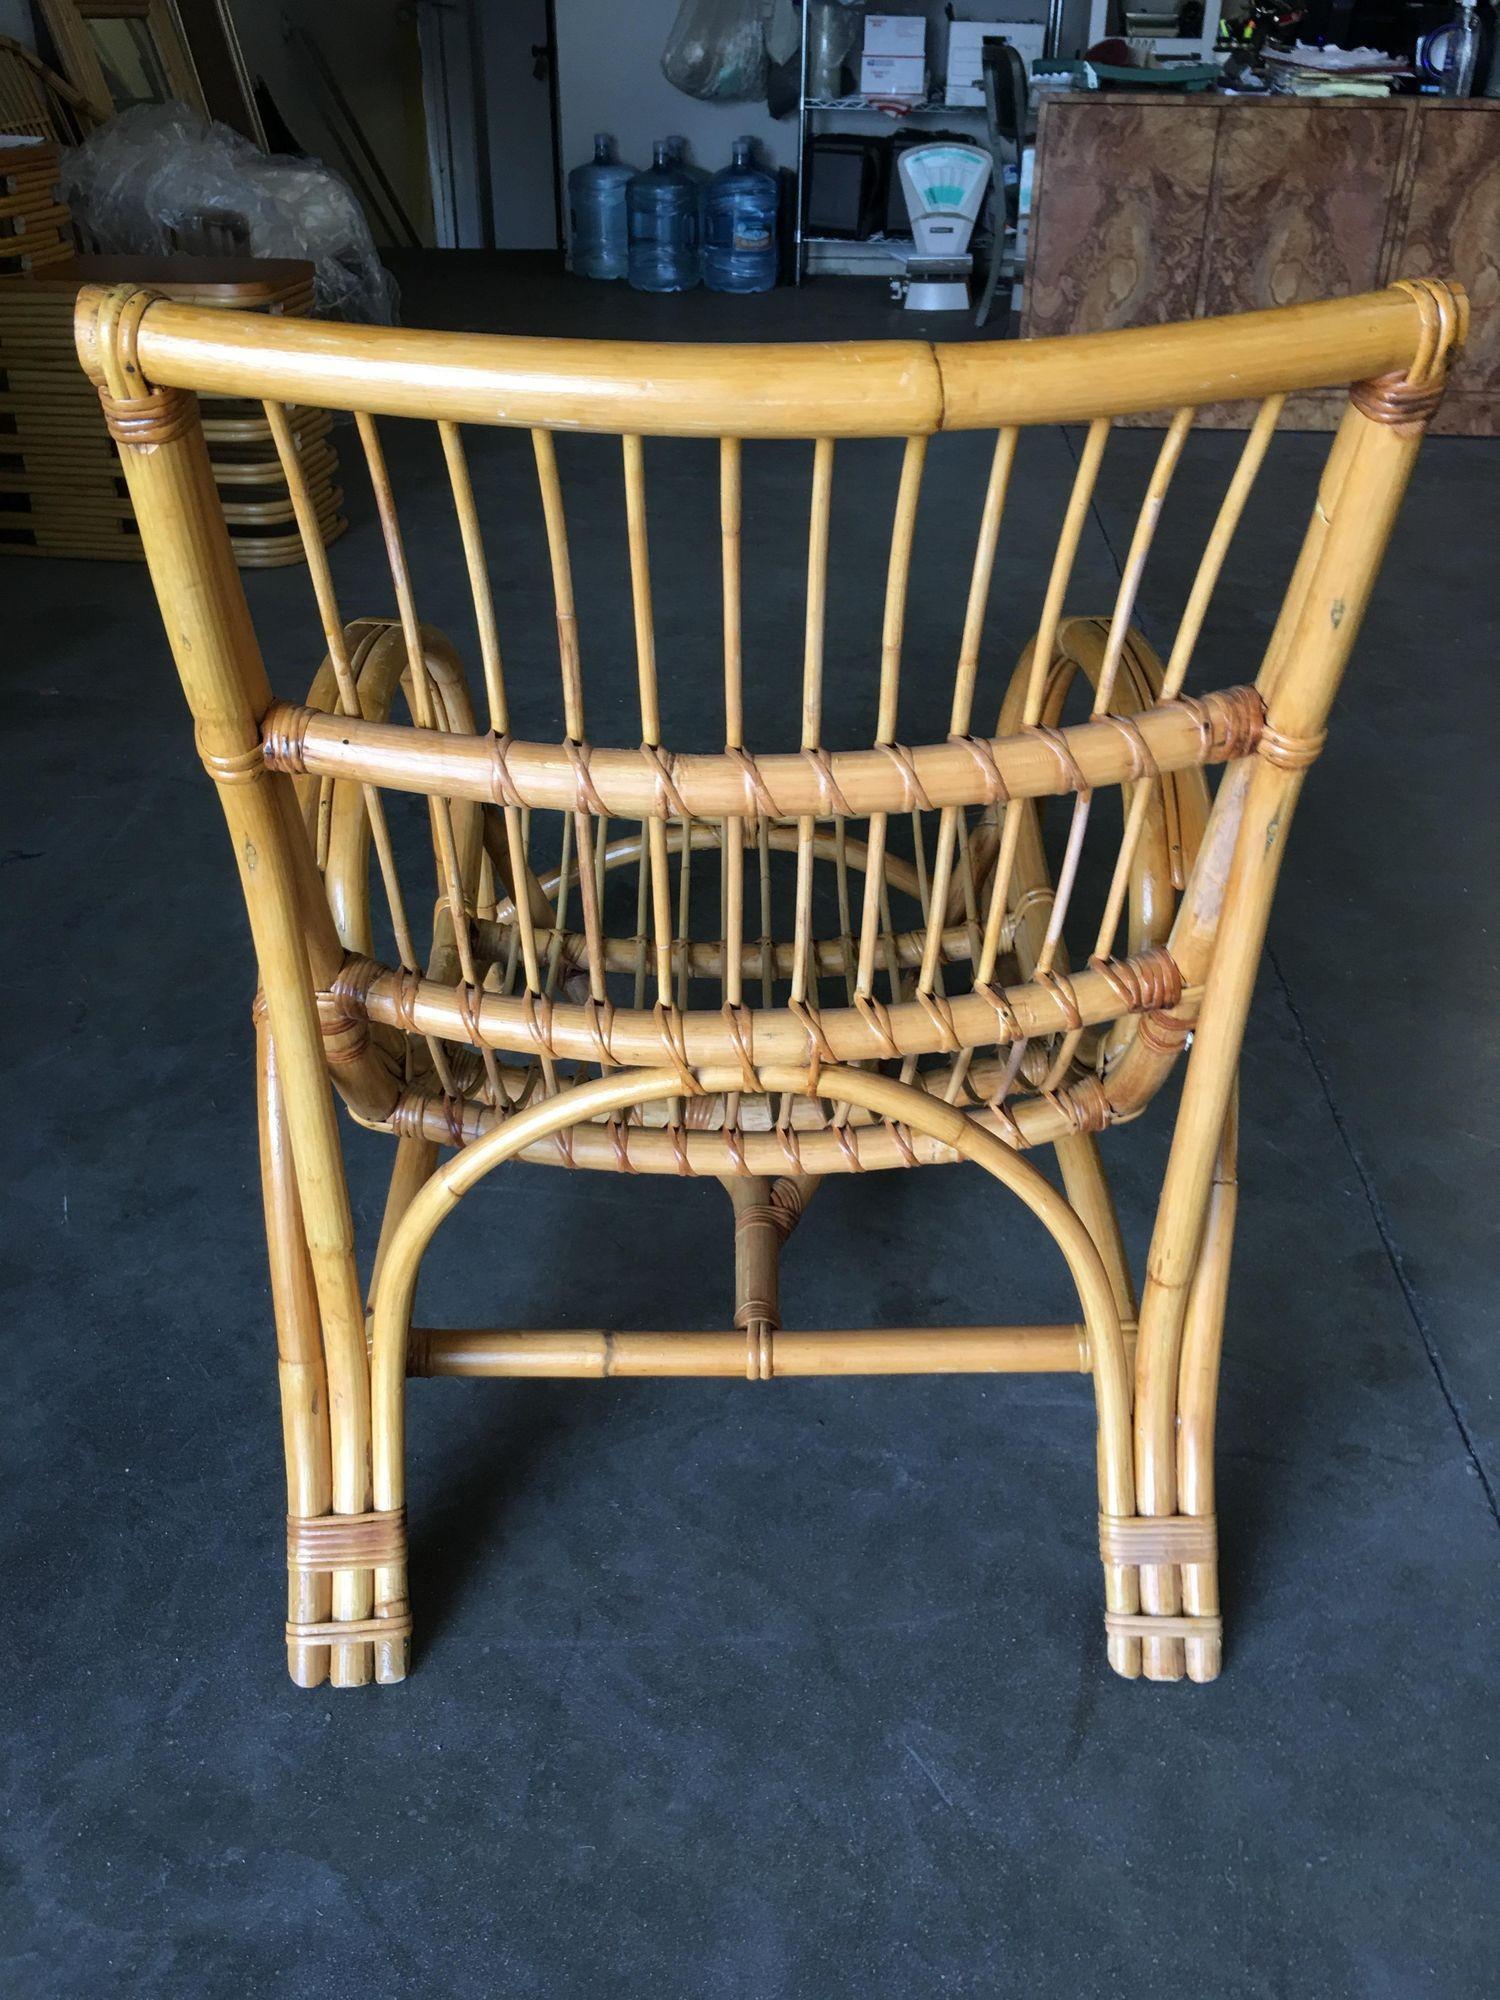 Restored Two-Strand Slope Seat Rattan Chaise Lounge With Ottoman For Sale 5